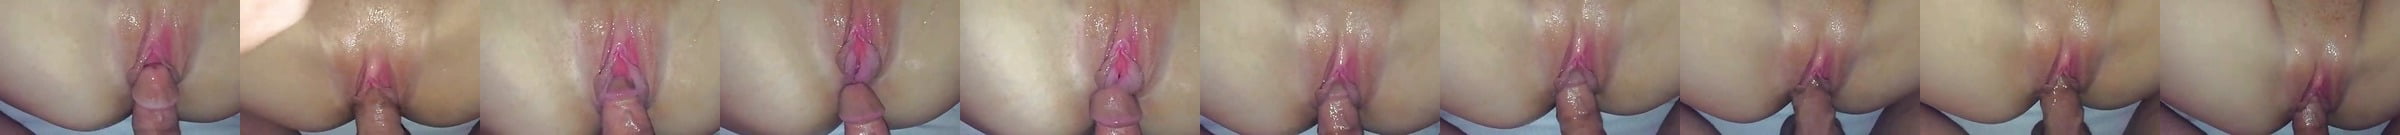 Featured Soaking Wet Porn Videos Xhamster